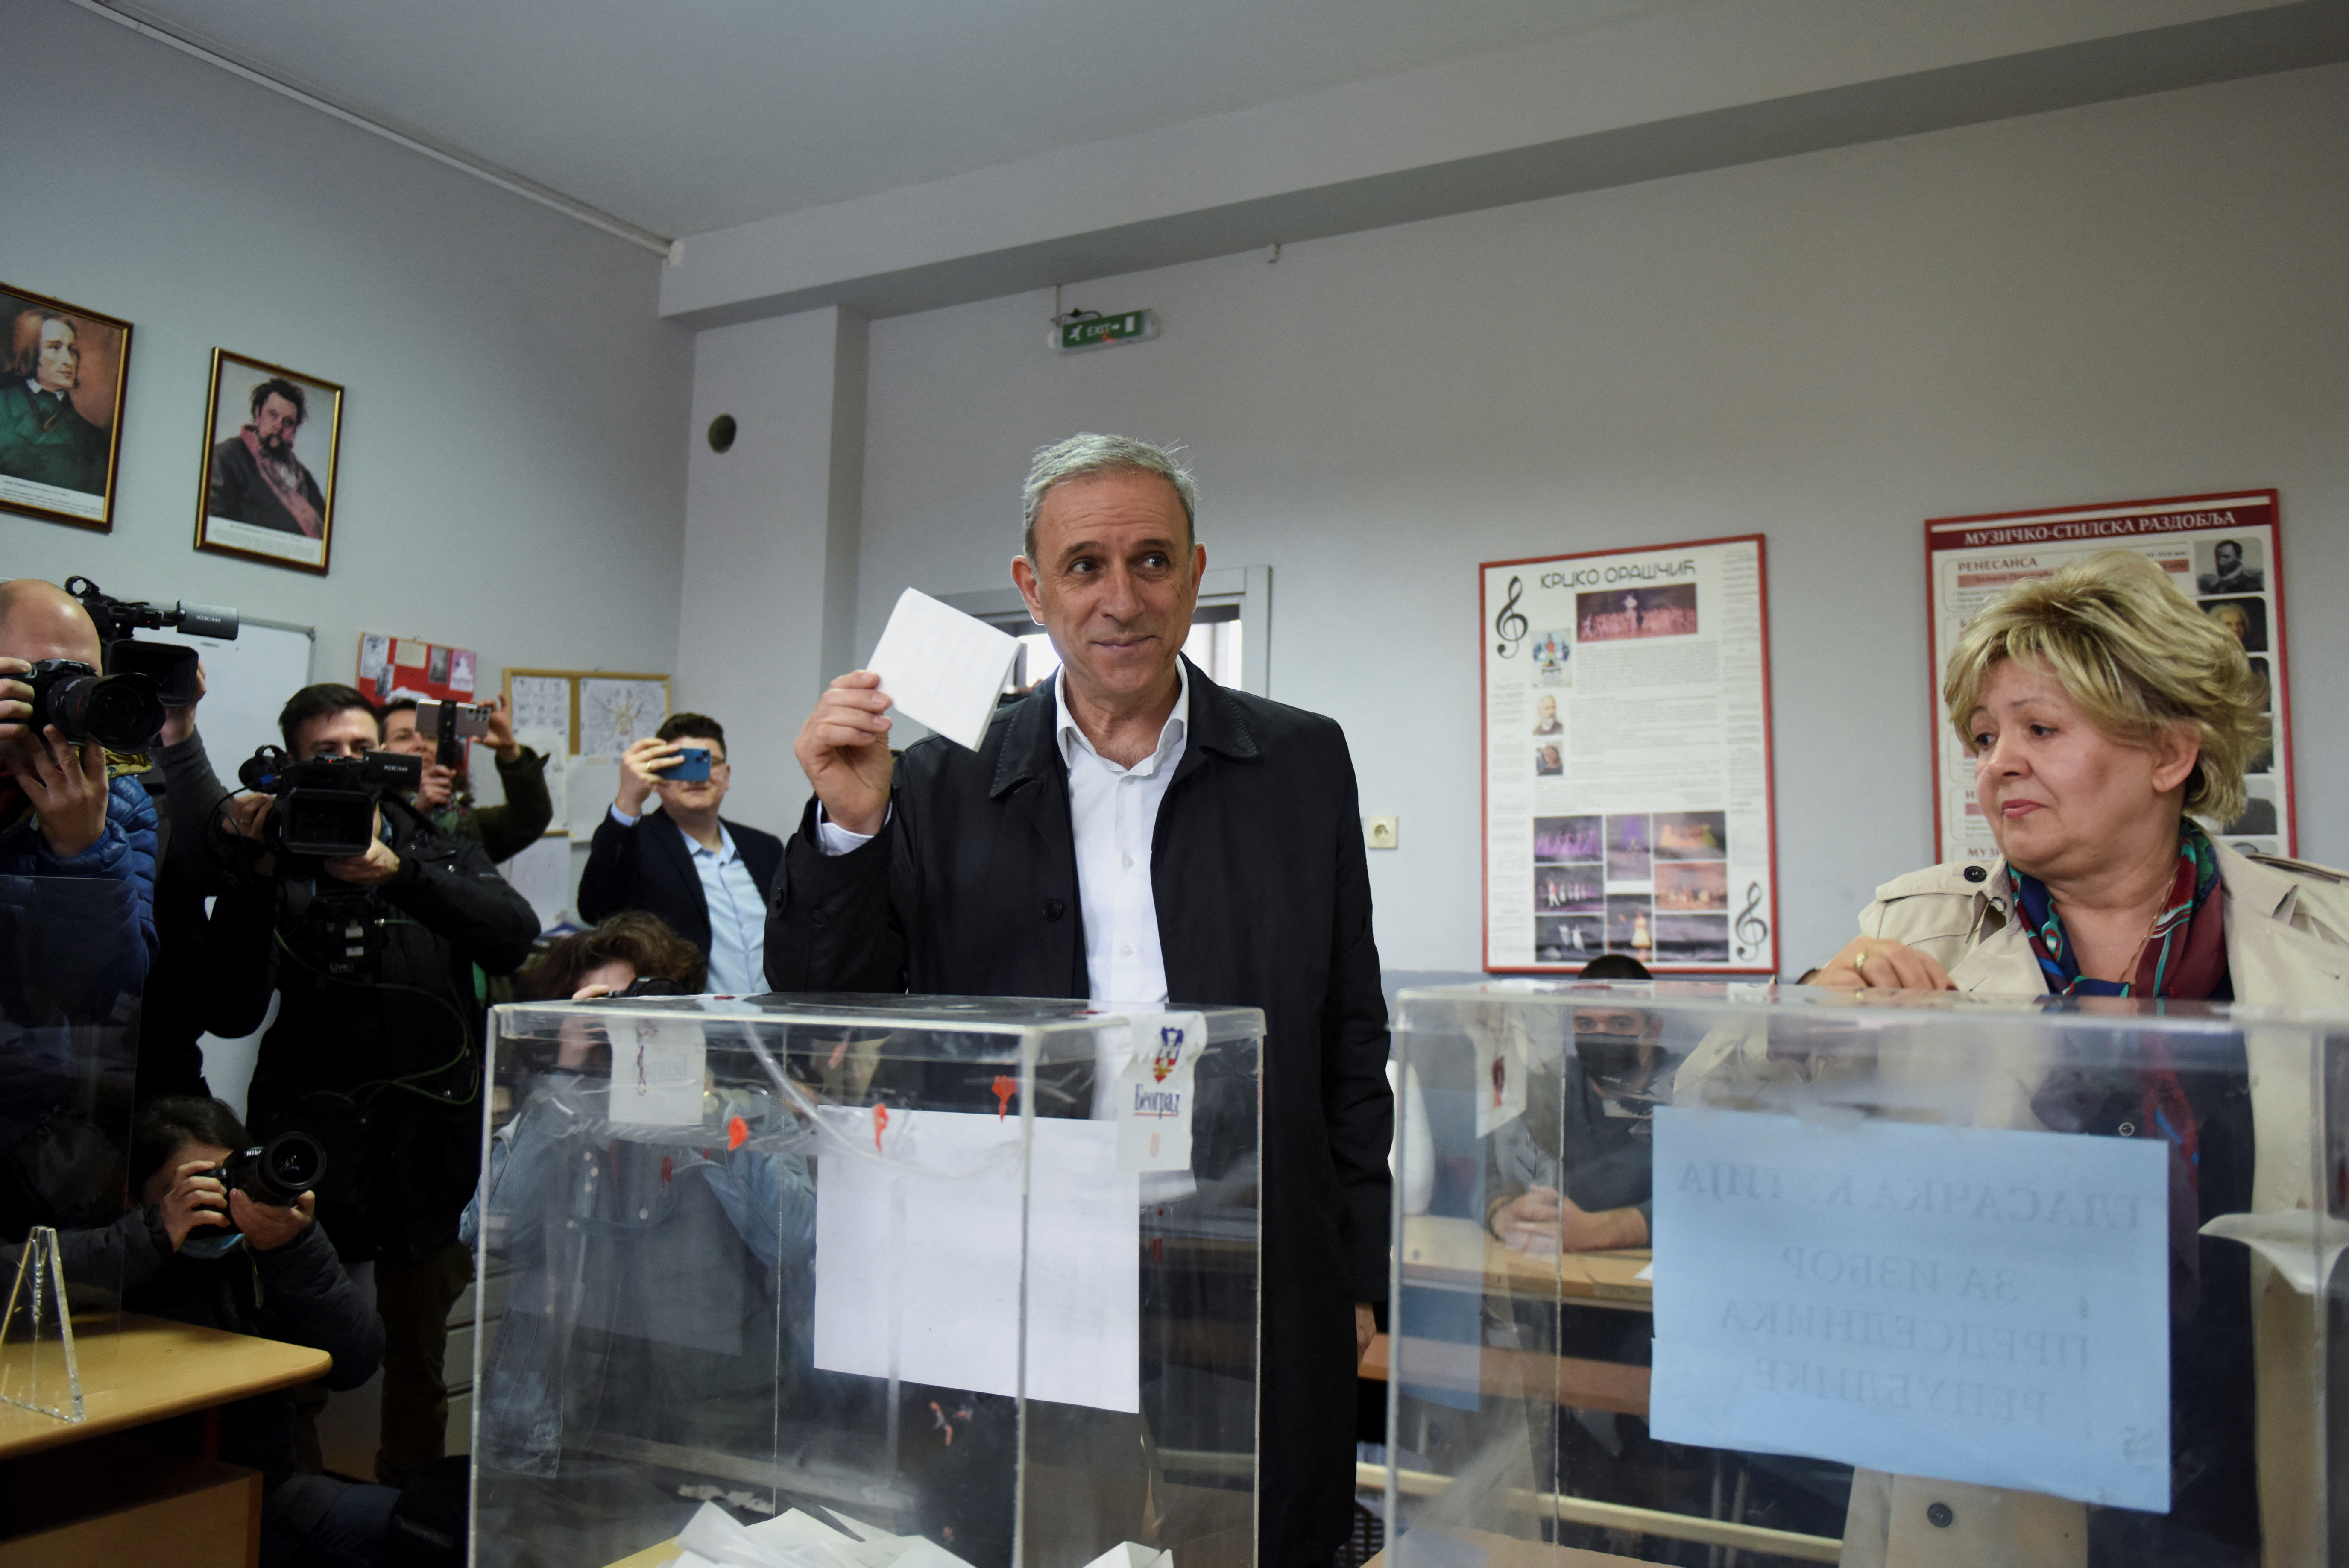 Voting in Serbia's general election